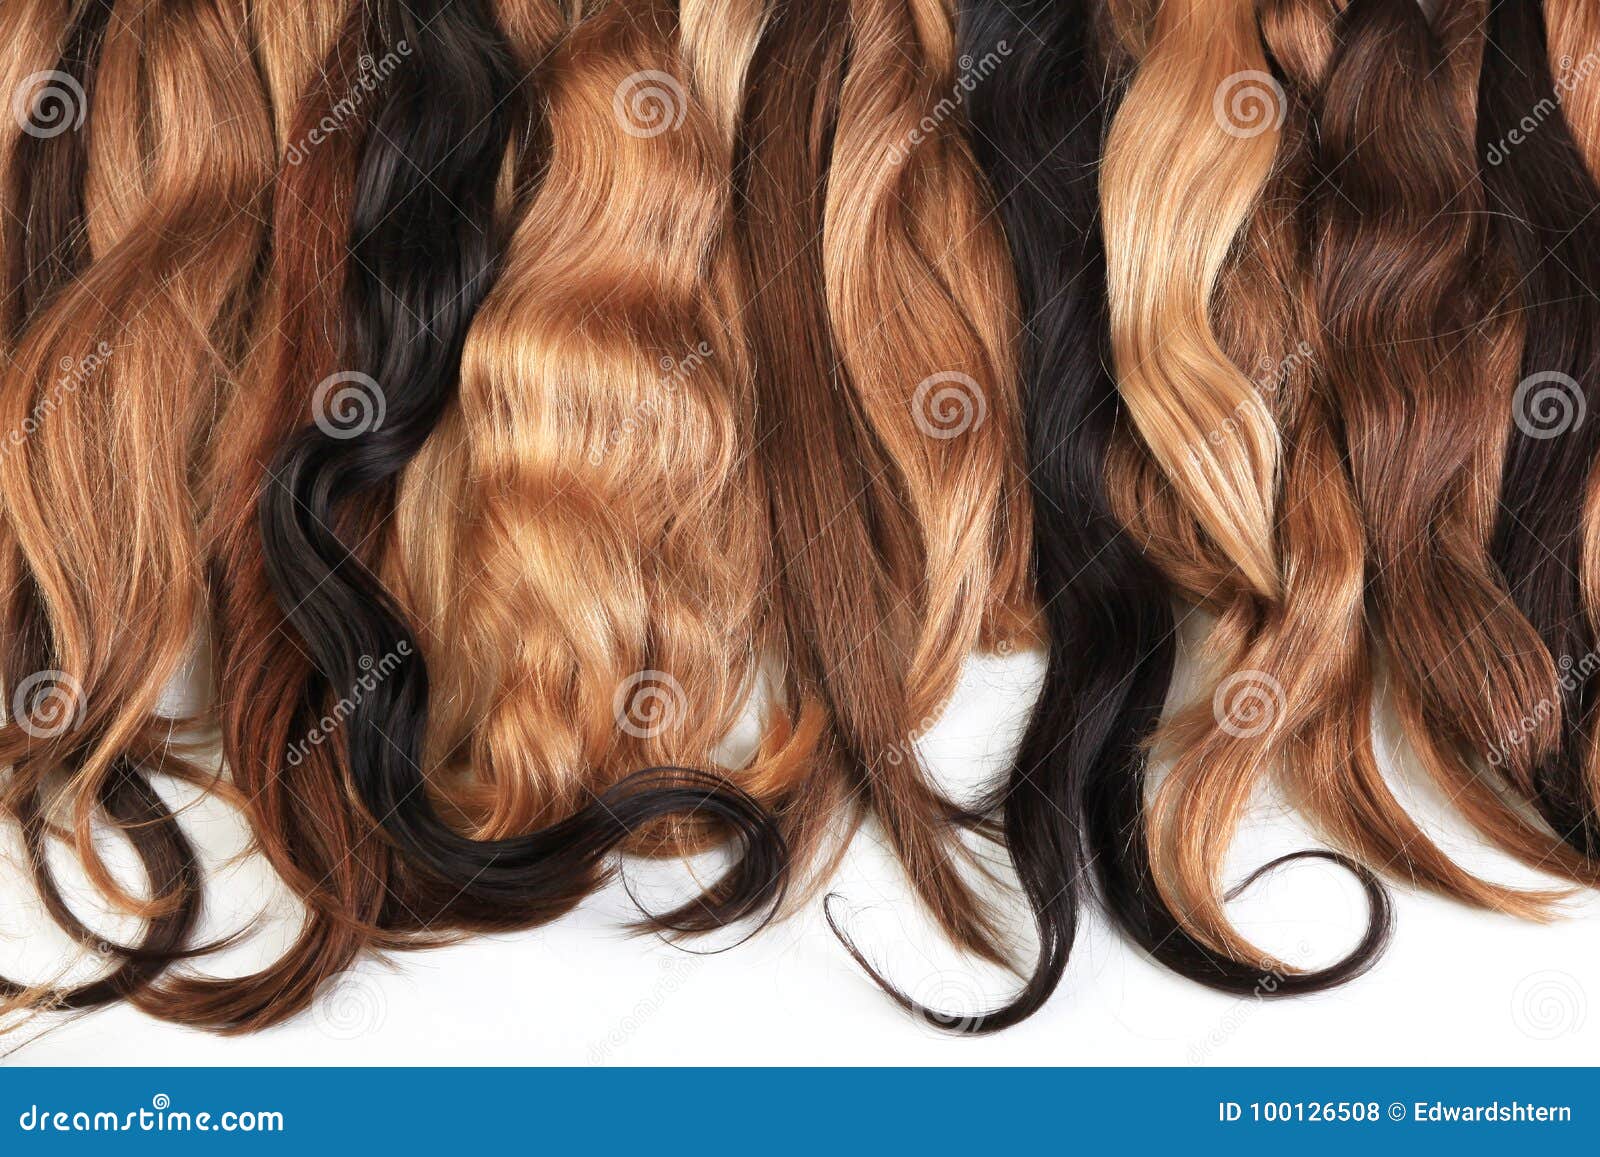 mix of natural extensions hair: blond, red, brown. strands of ha